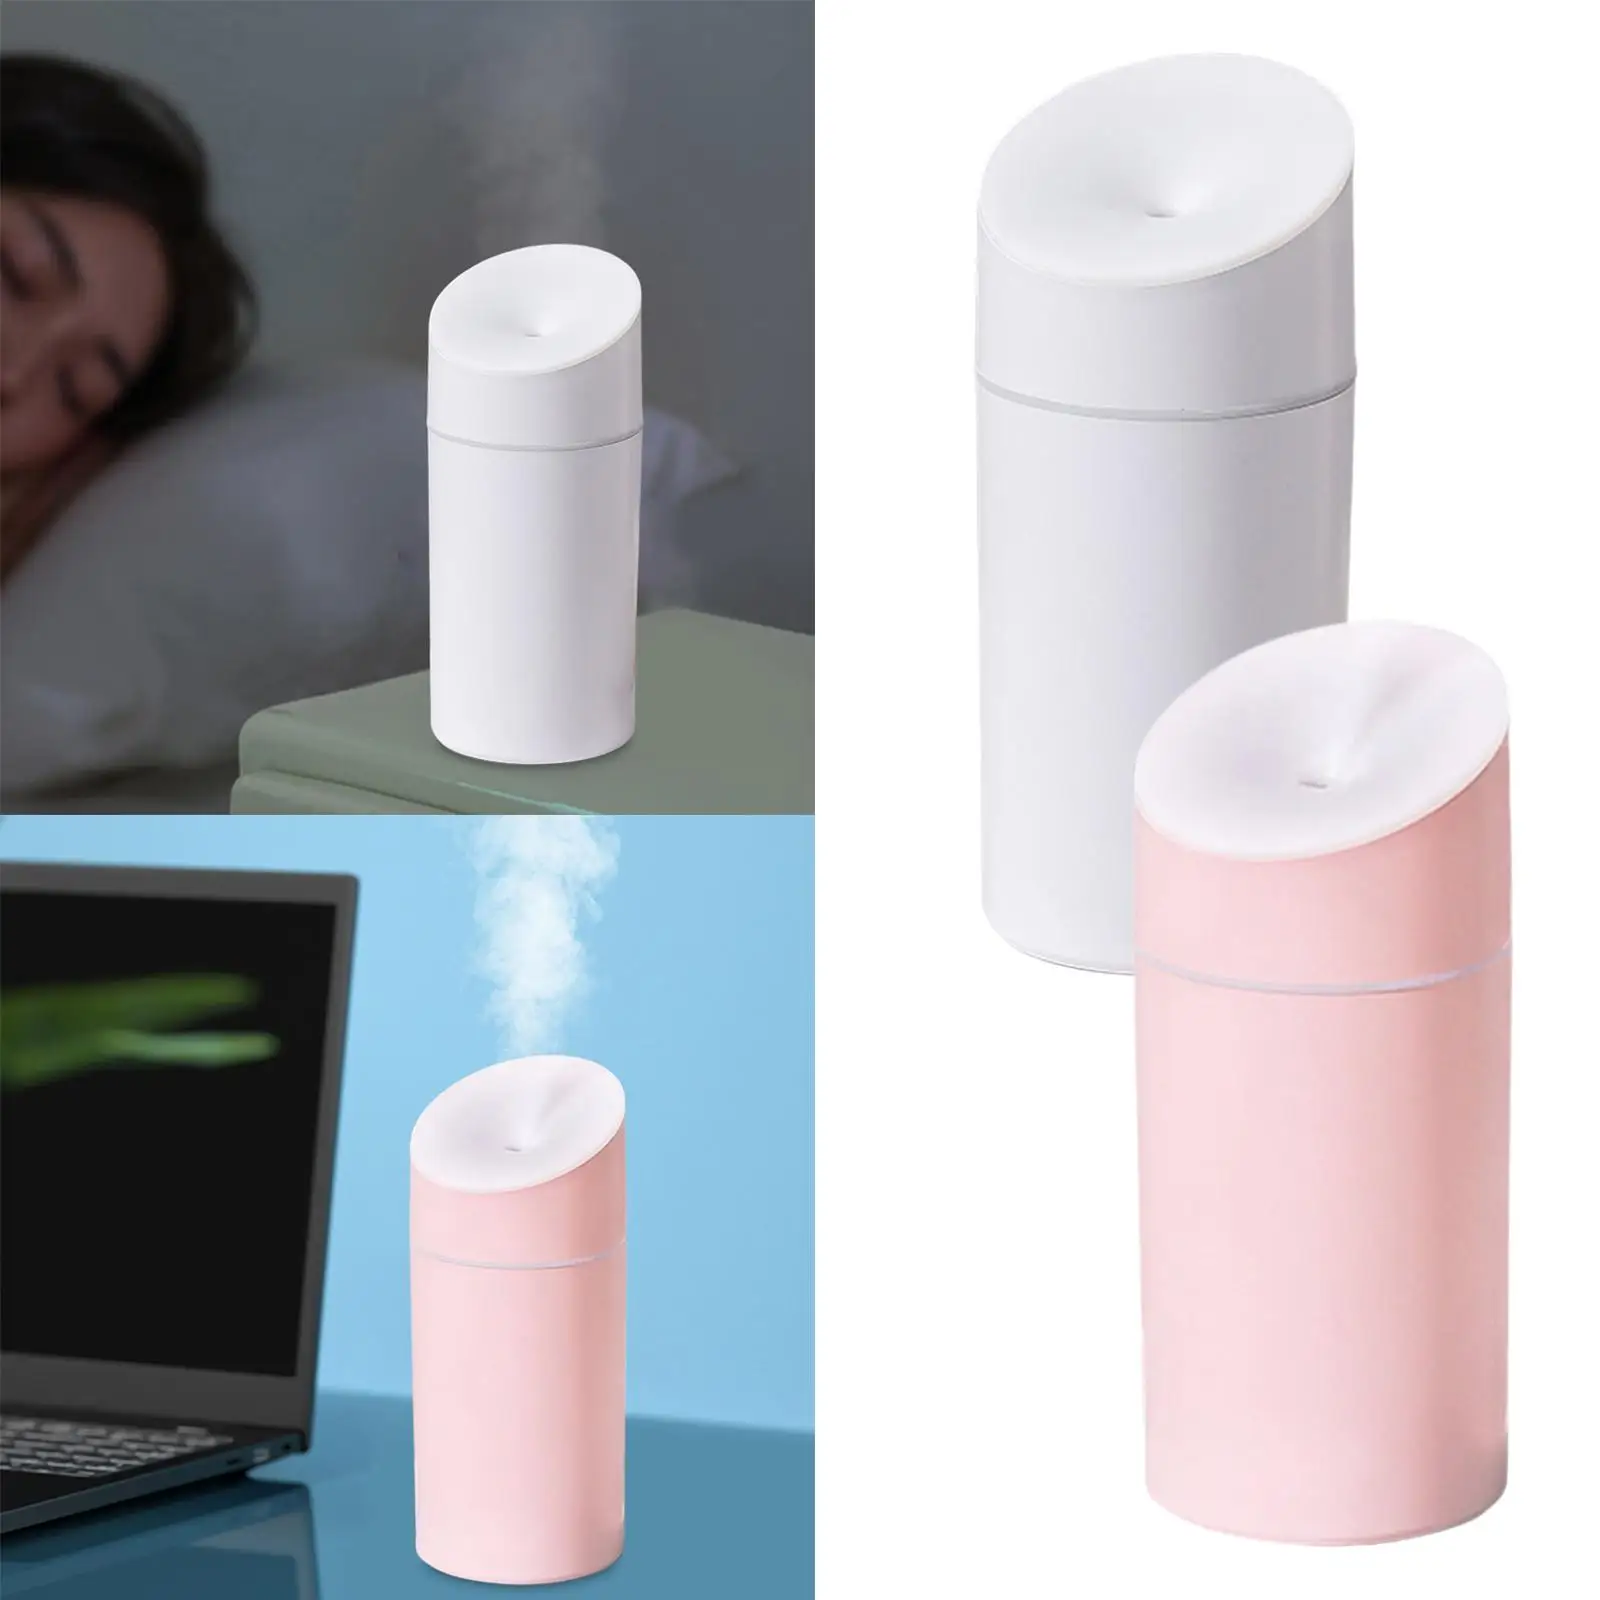 Electric Air Humidifier USB LED Night Light Quiet Operation for Aroma Sprayer Adjustable for Home Room Office Yoga